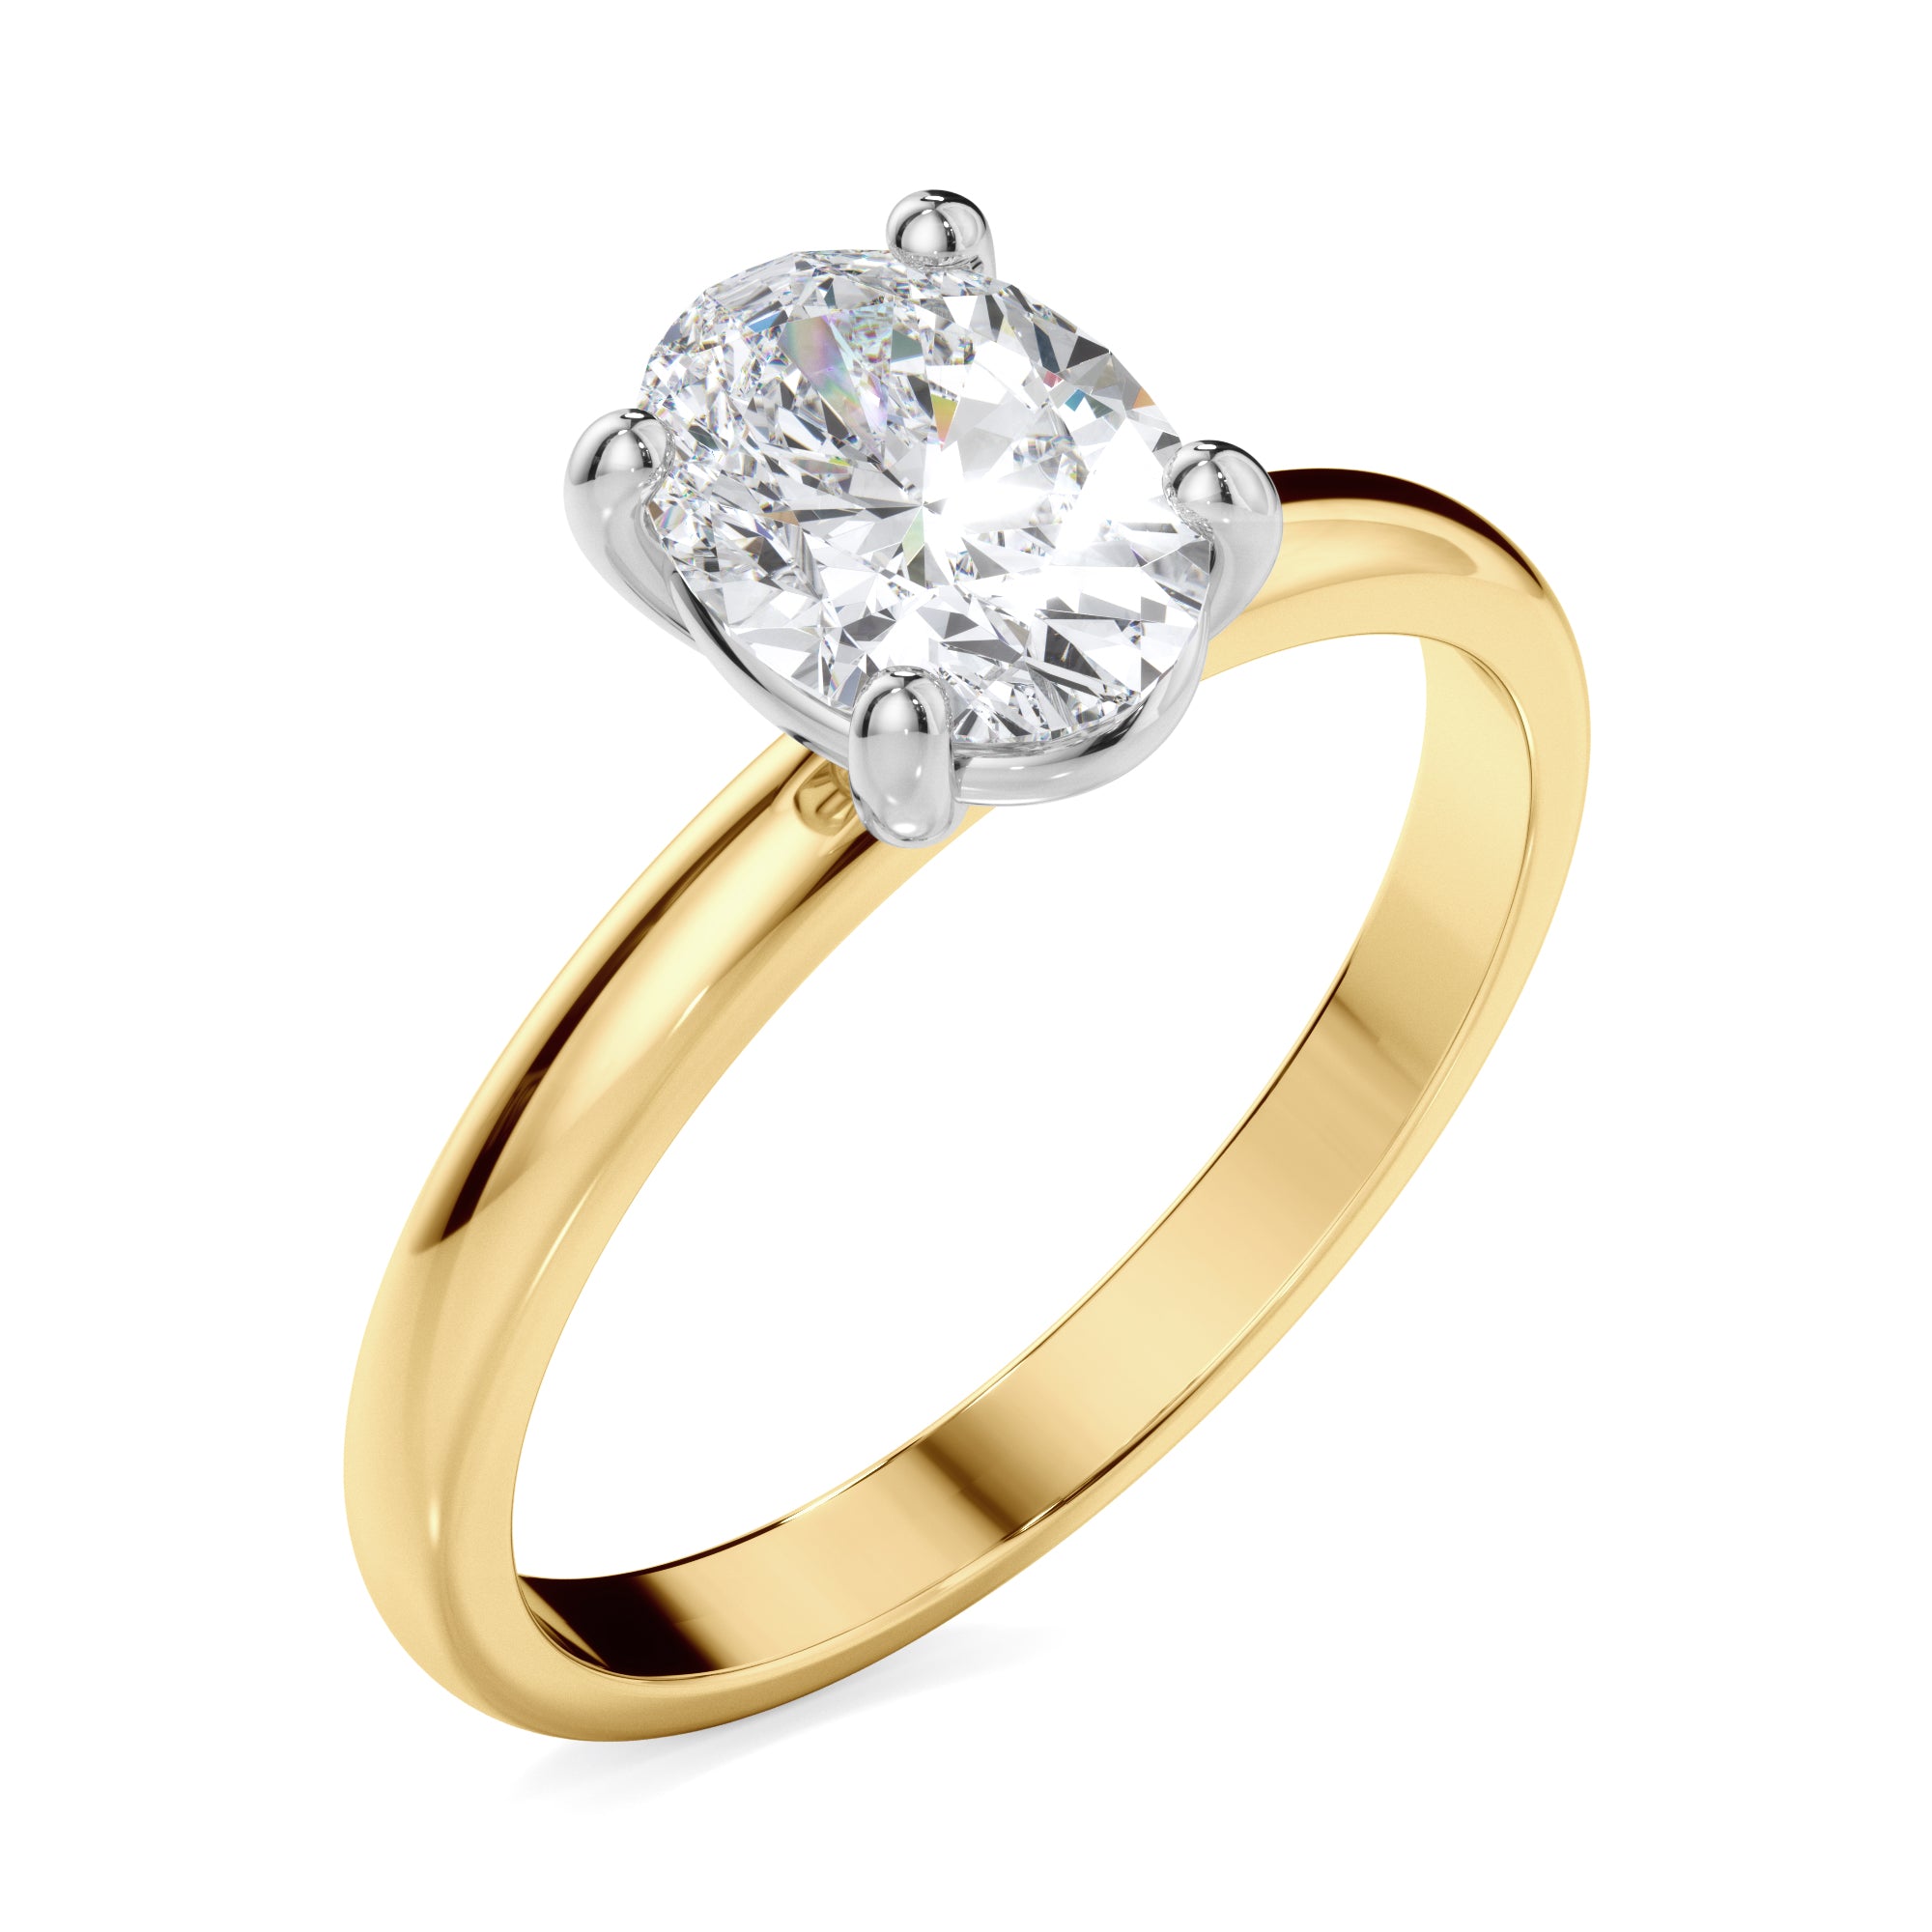 18ct Yellow and White Gold Oval Diamond Cut Engagement Ring